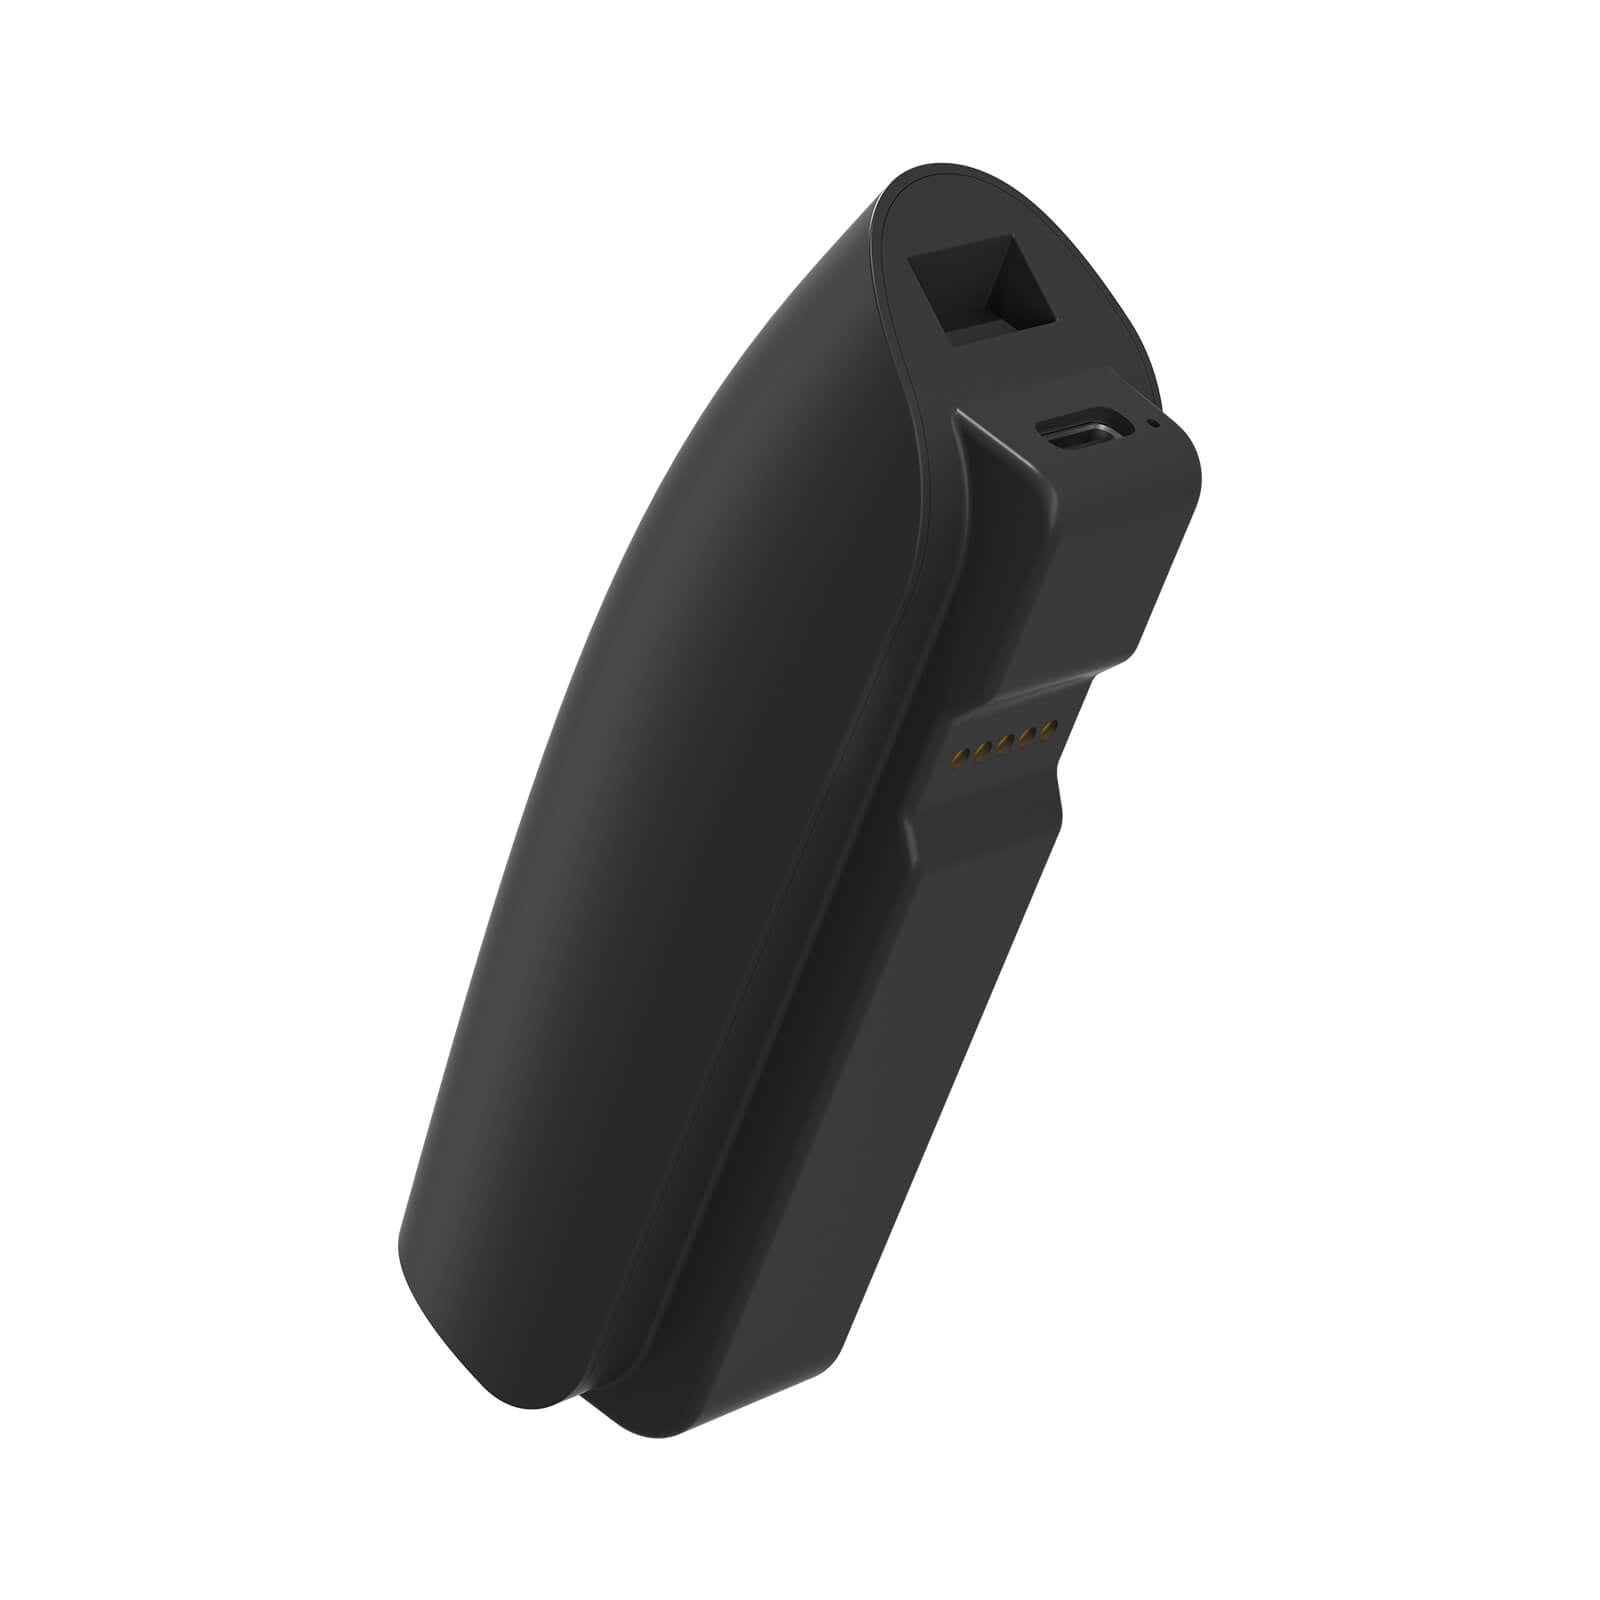 ZyberVR Quick-Charge Neck Power Bank With Swappable Battery